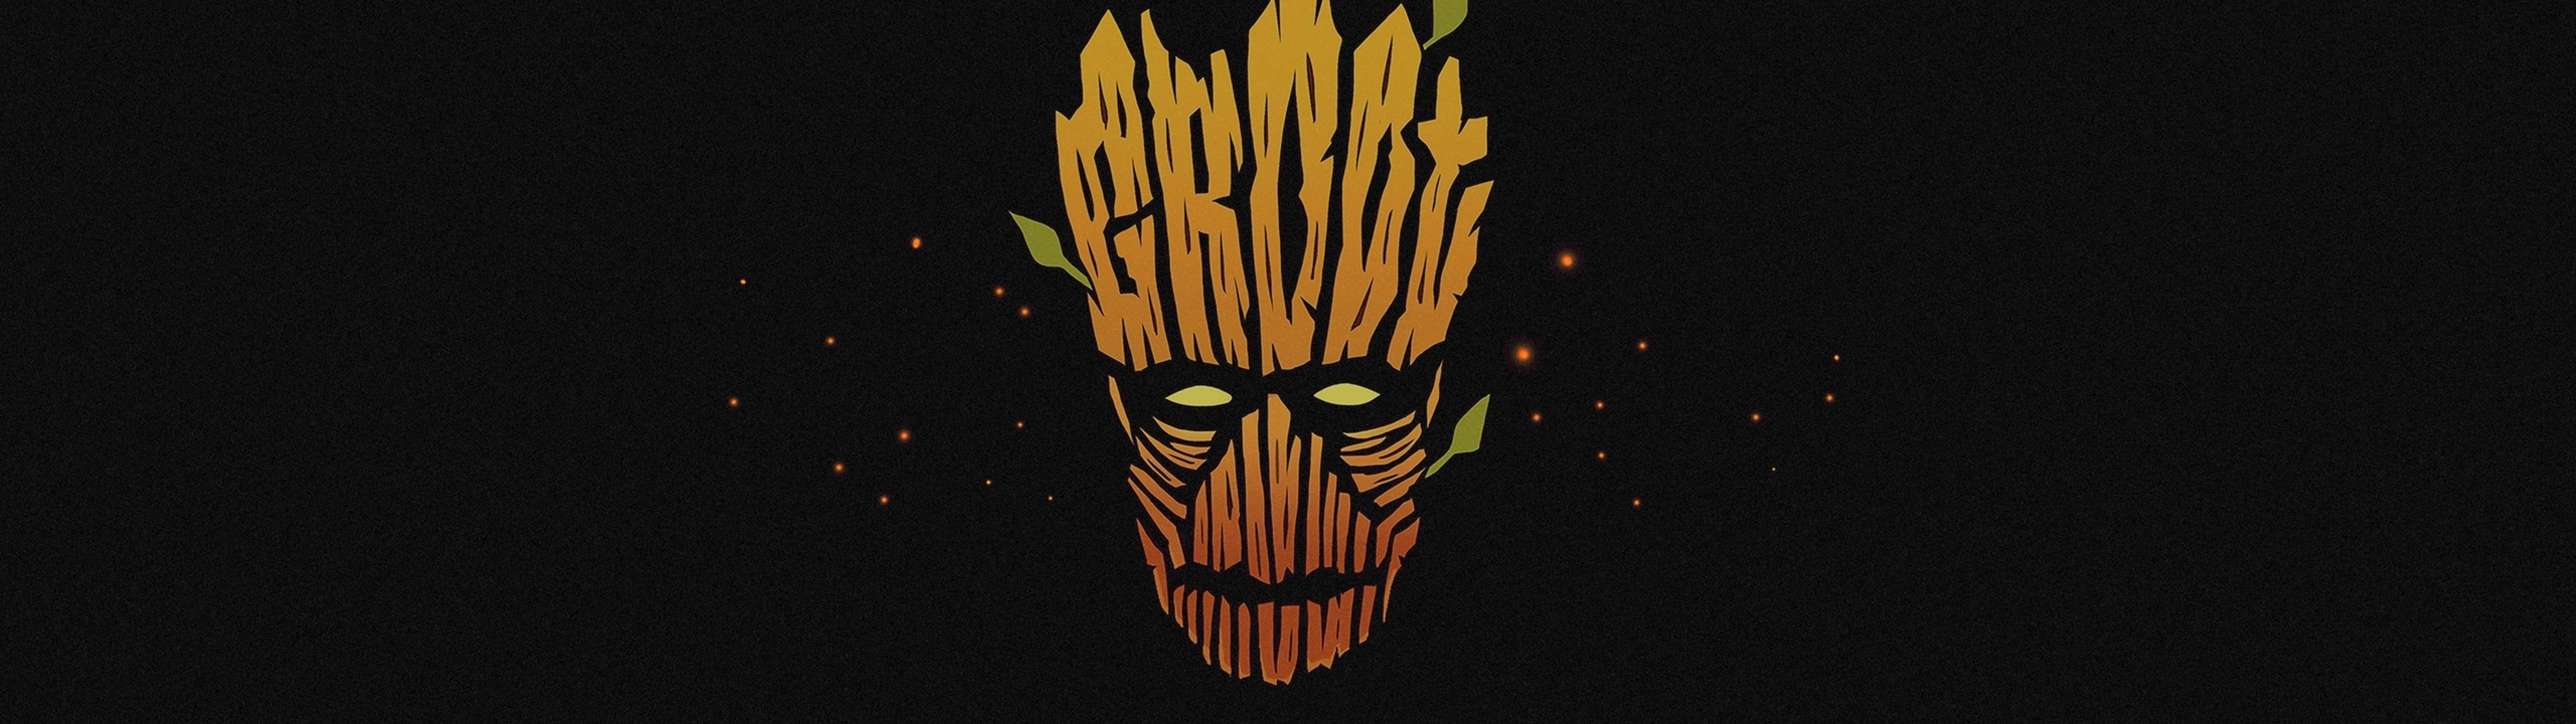 Groot,guardians Of The Galaxy, Marvel 5120 X 1440. Wallpaper